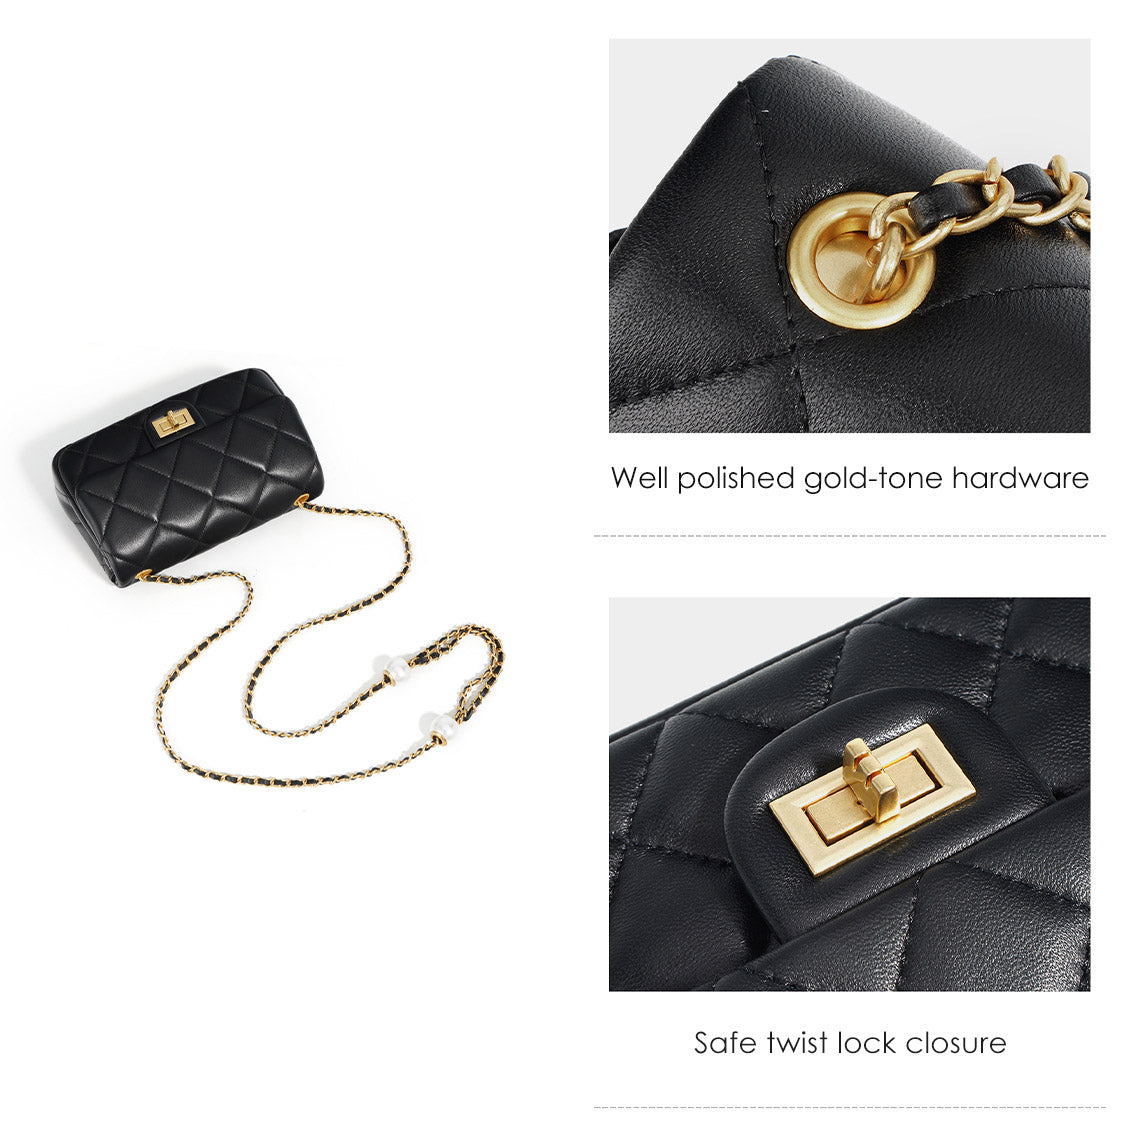 Black Mini Leather Bag with Gold-tone Hardware | Genuine Leather Bag Details